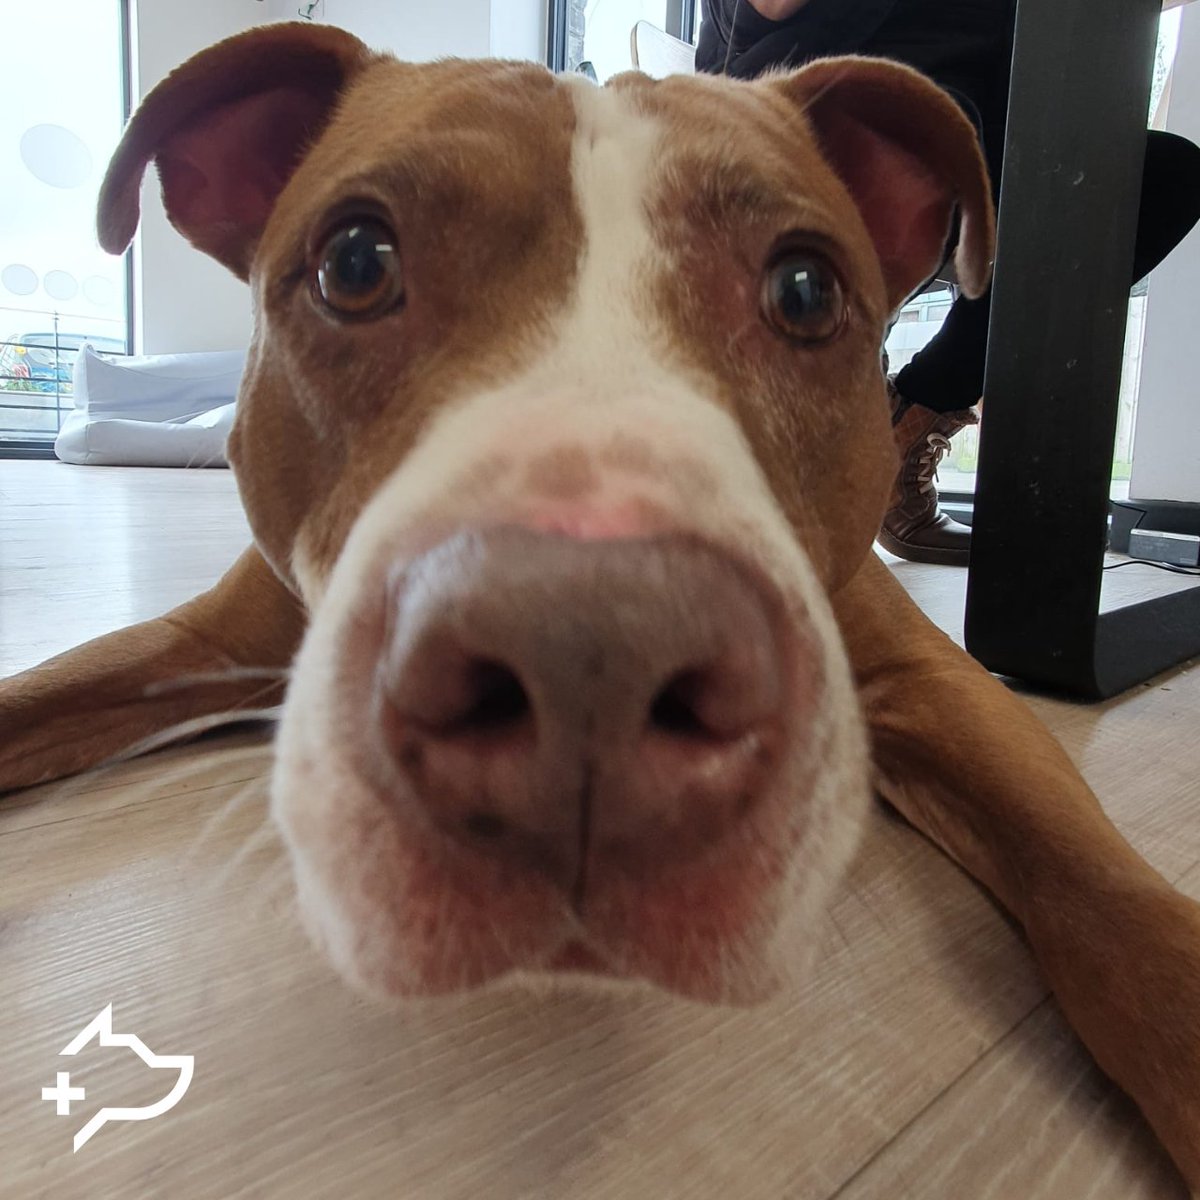 Show some love for #StreetVet patient Biggie and boop the snoot 💙 You can learn more about StreetVet and how you can support our #animalcharity then please visit our website today 👉 bit.ly/48XBVjK #Sharethelove #allforthepaws